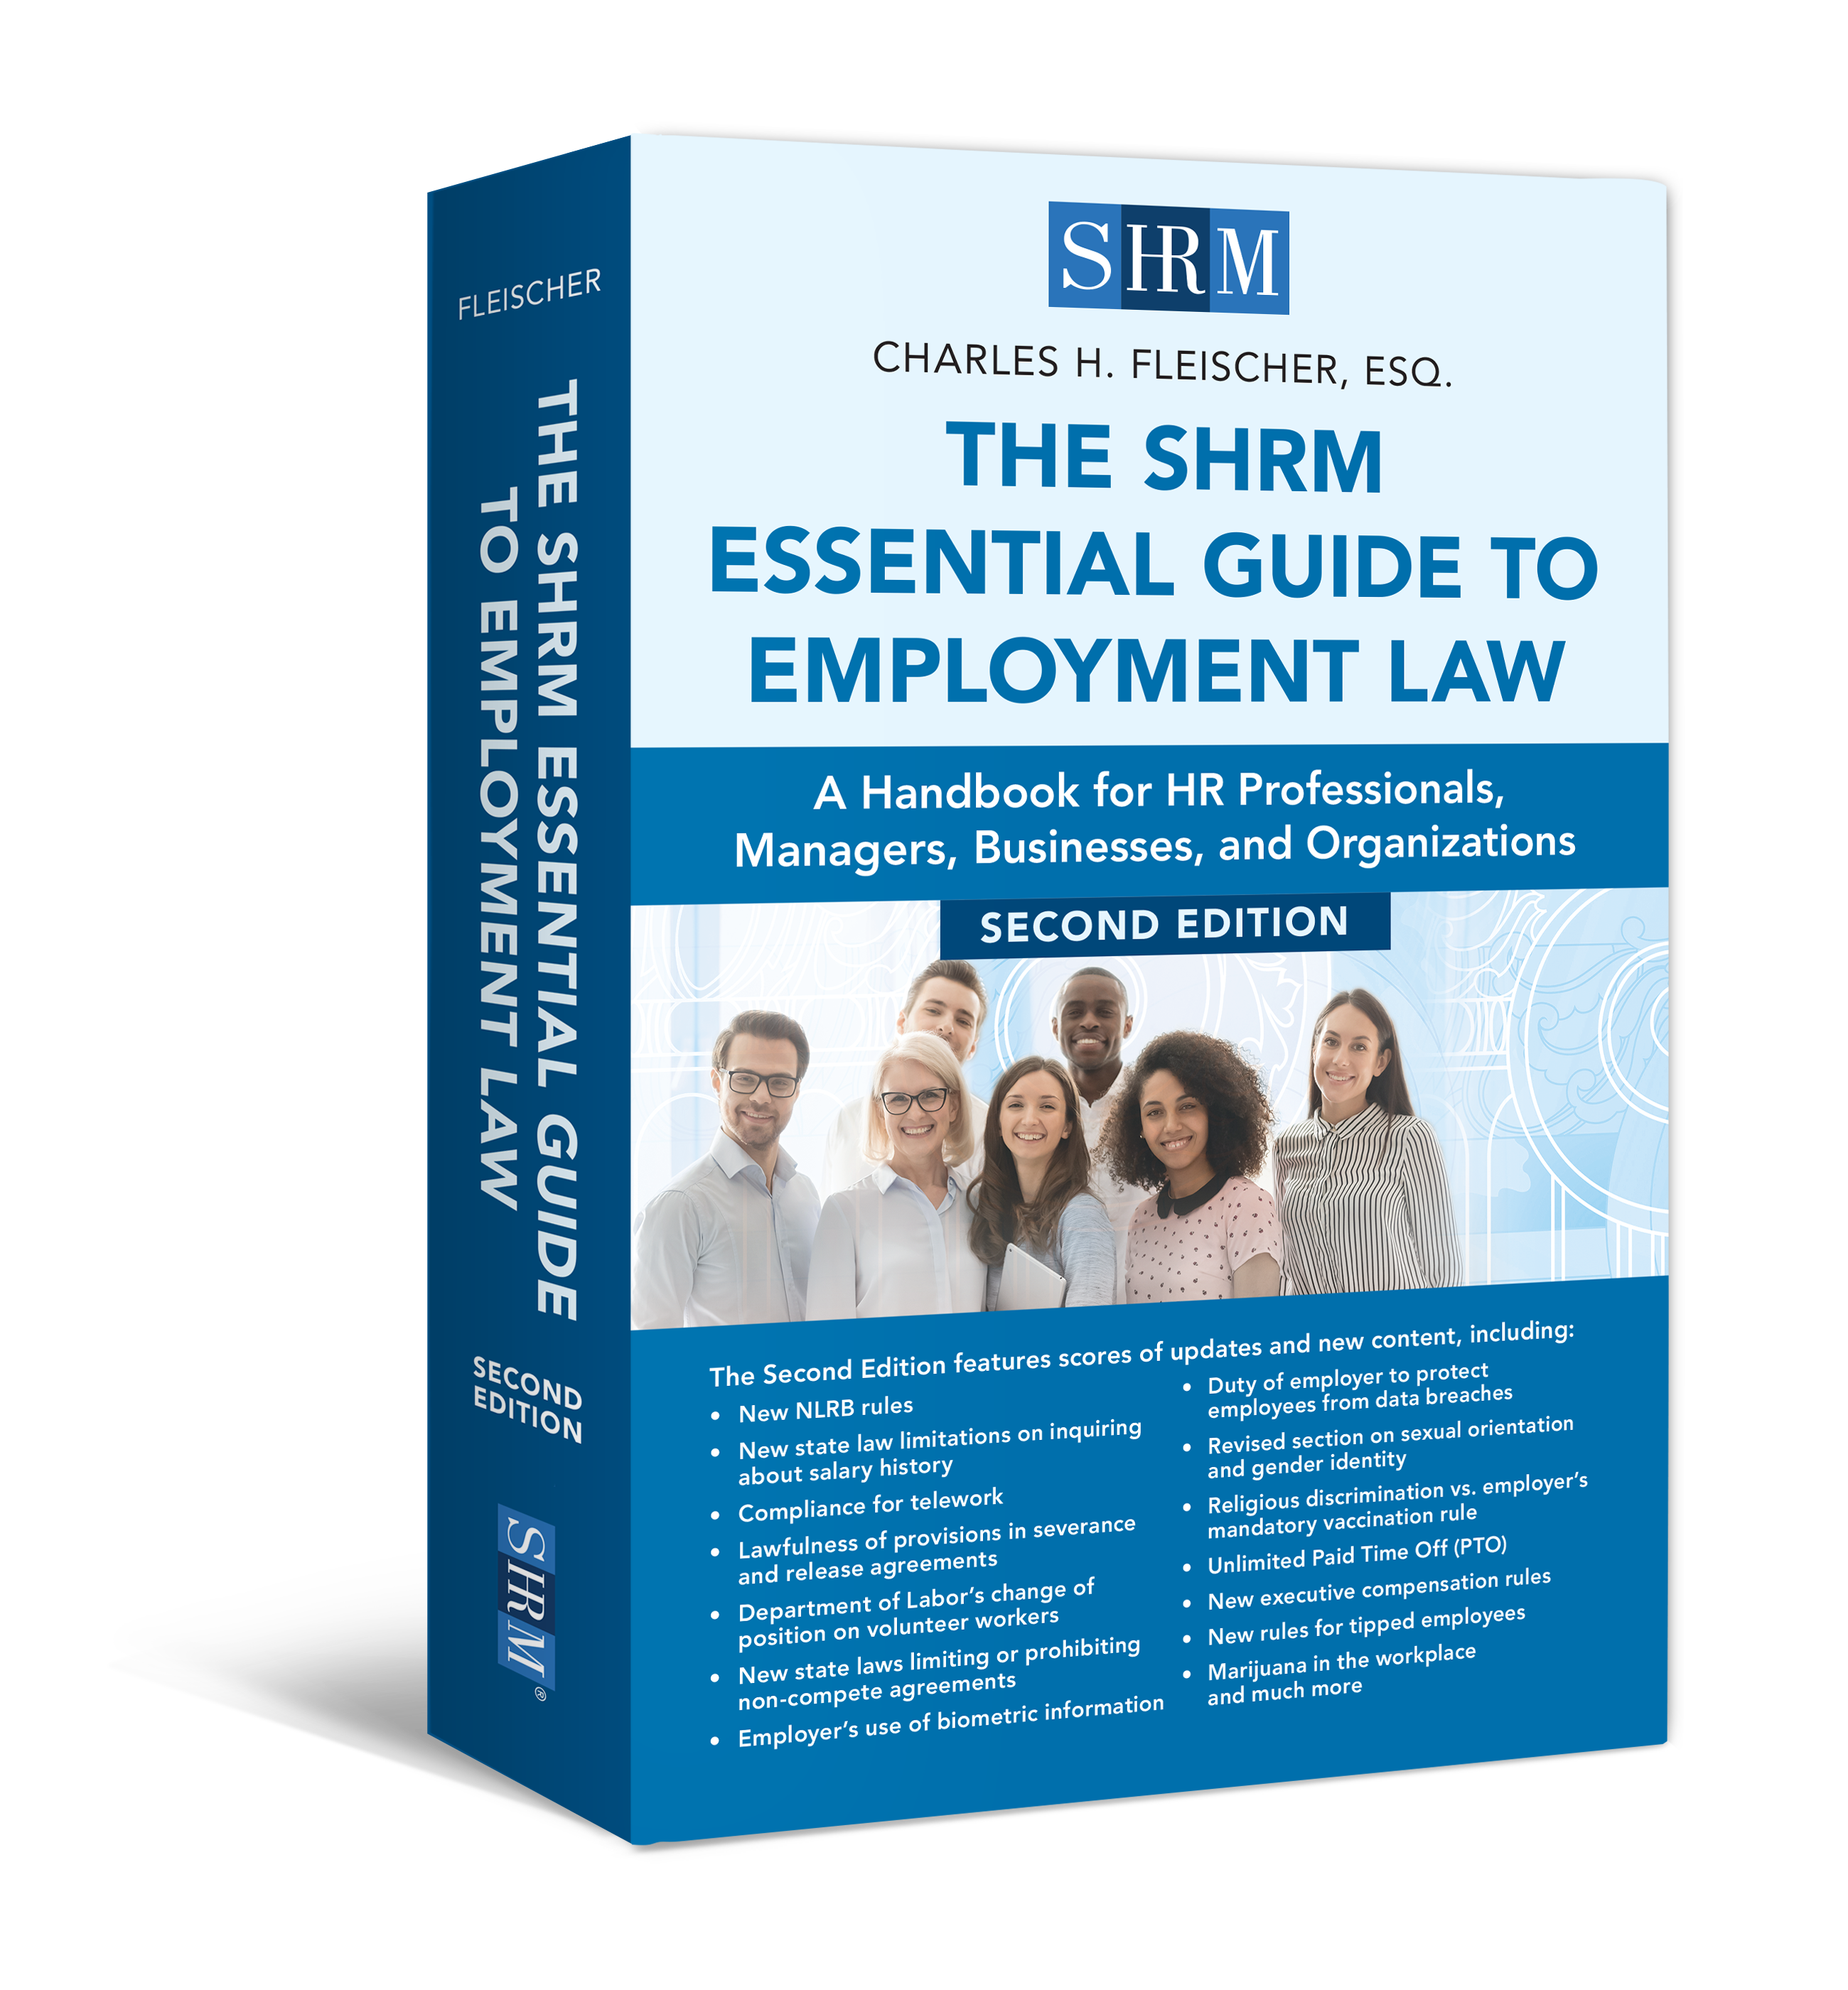 The SHRM Essential Guide to Employment Law: A Handbook for HR Professionals, Managers, Businesses, and Organizations, Second Edition book cover